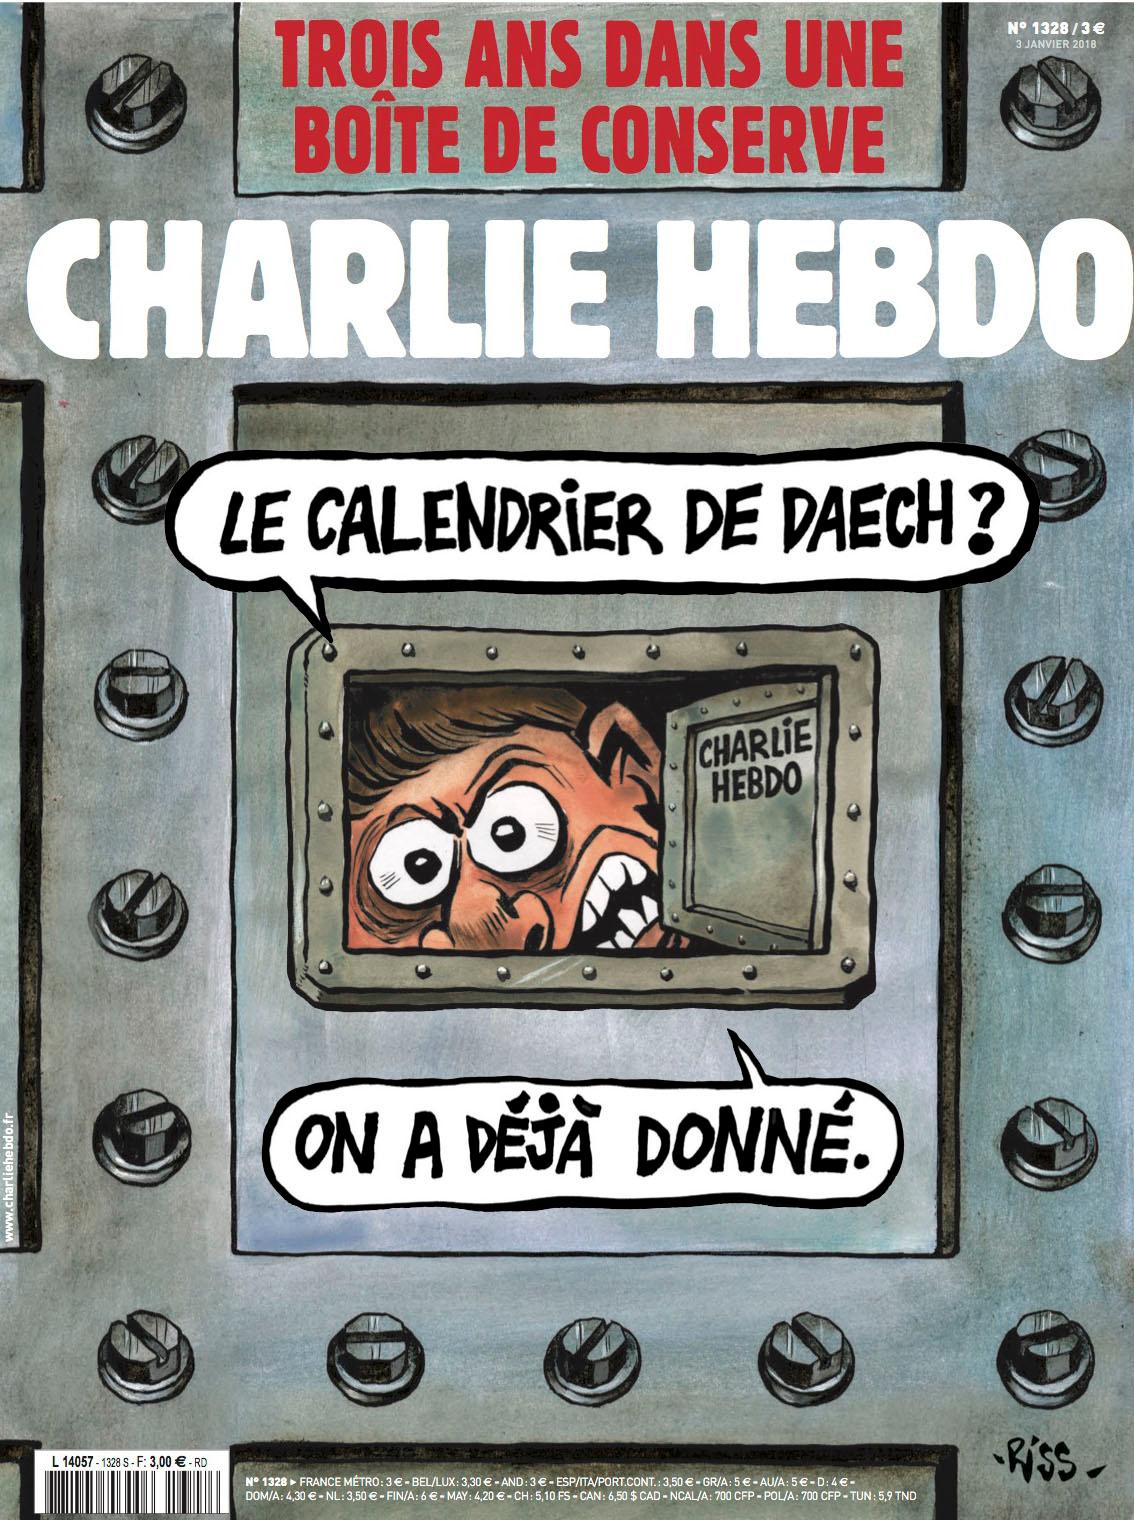 The cover of Charlie Hebdo's first issue in 2018. The headline reads: 